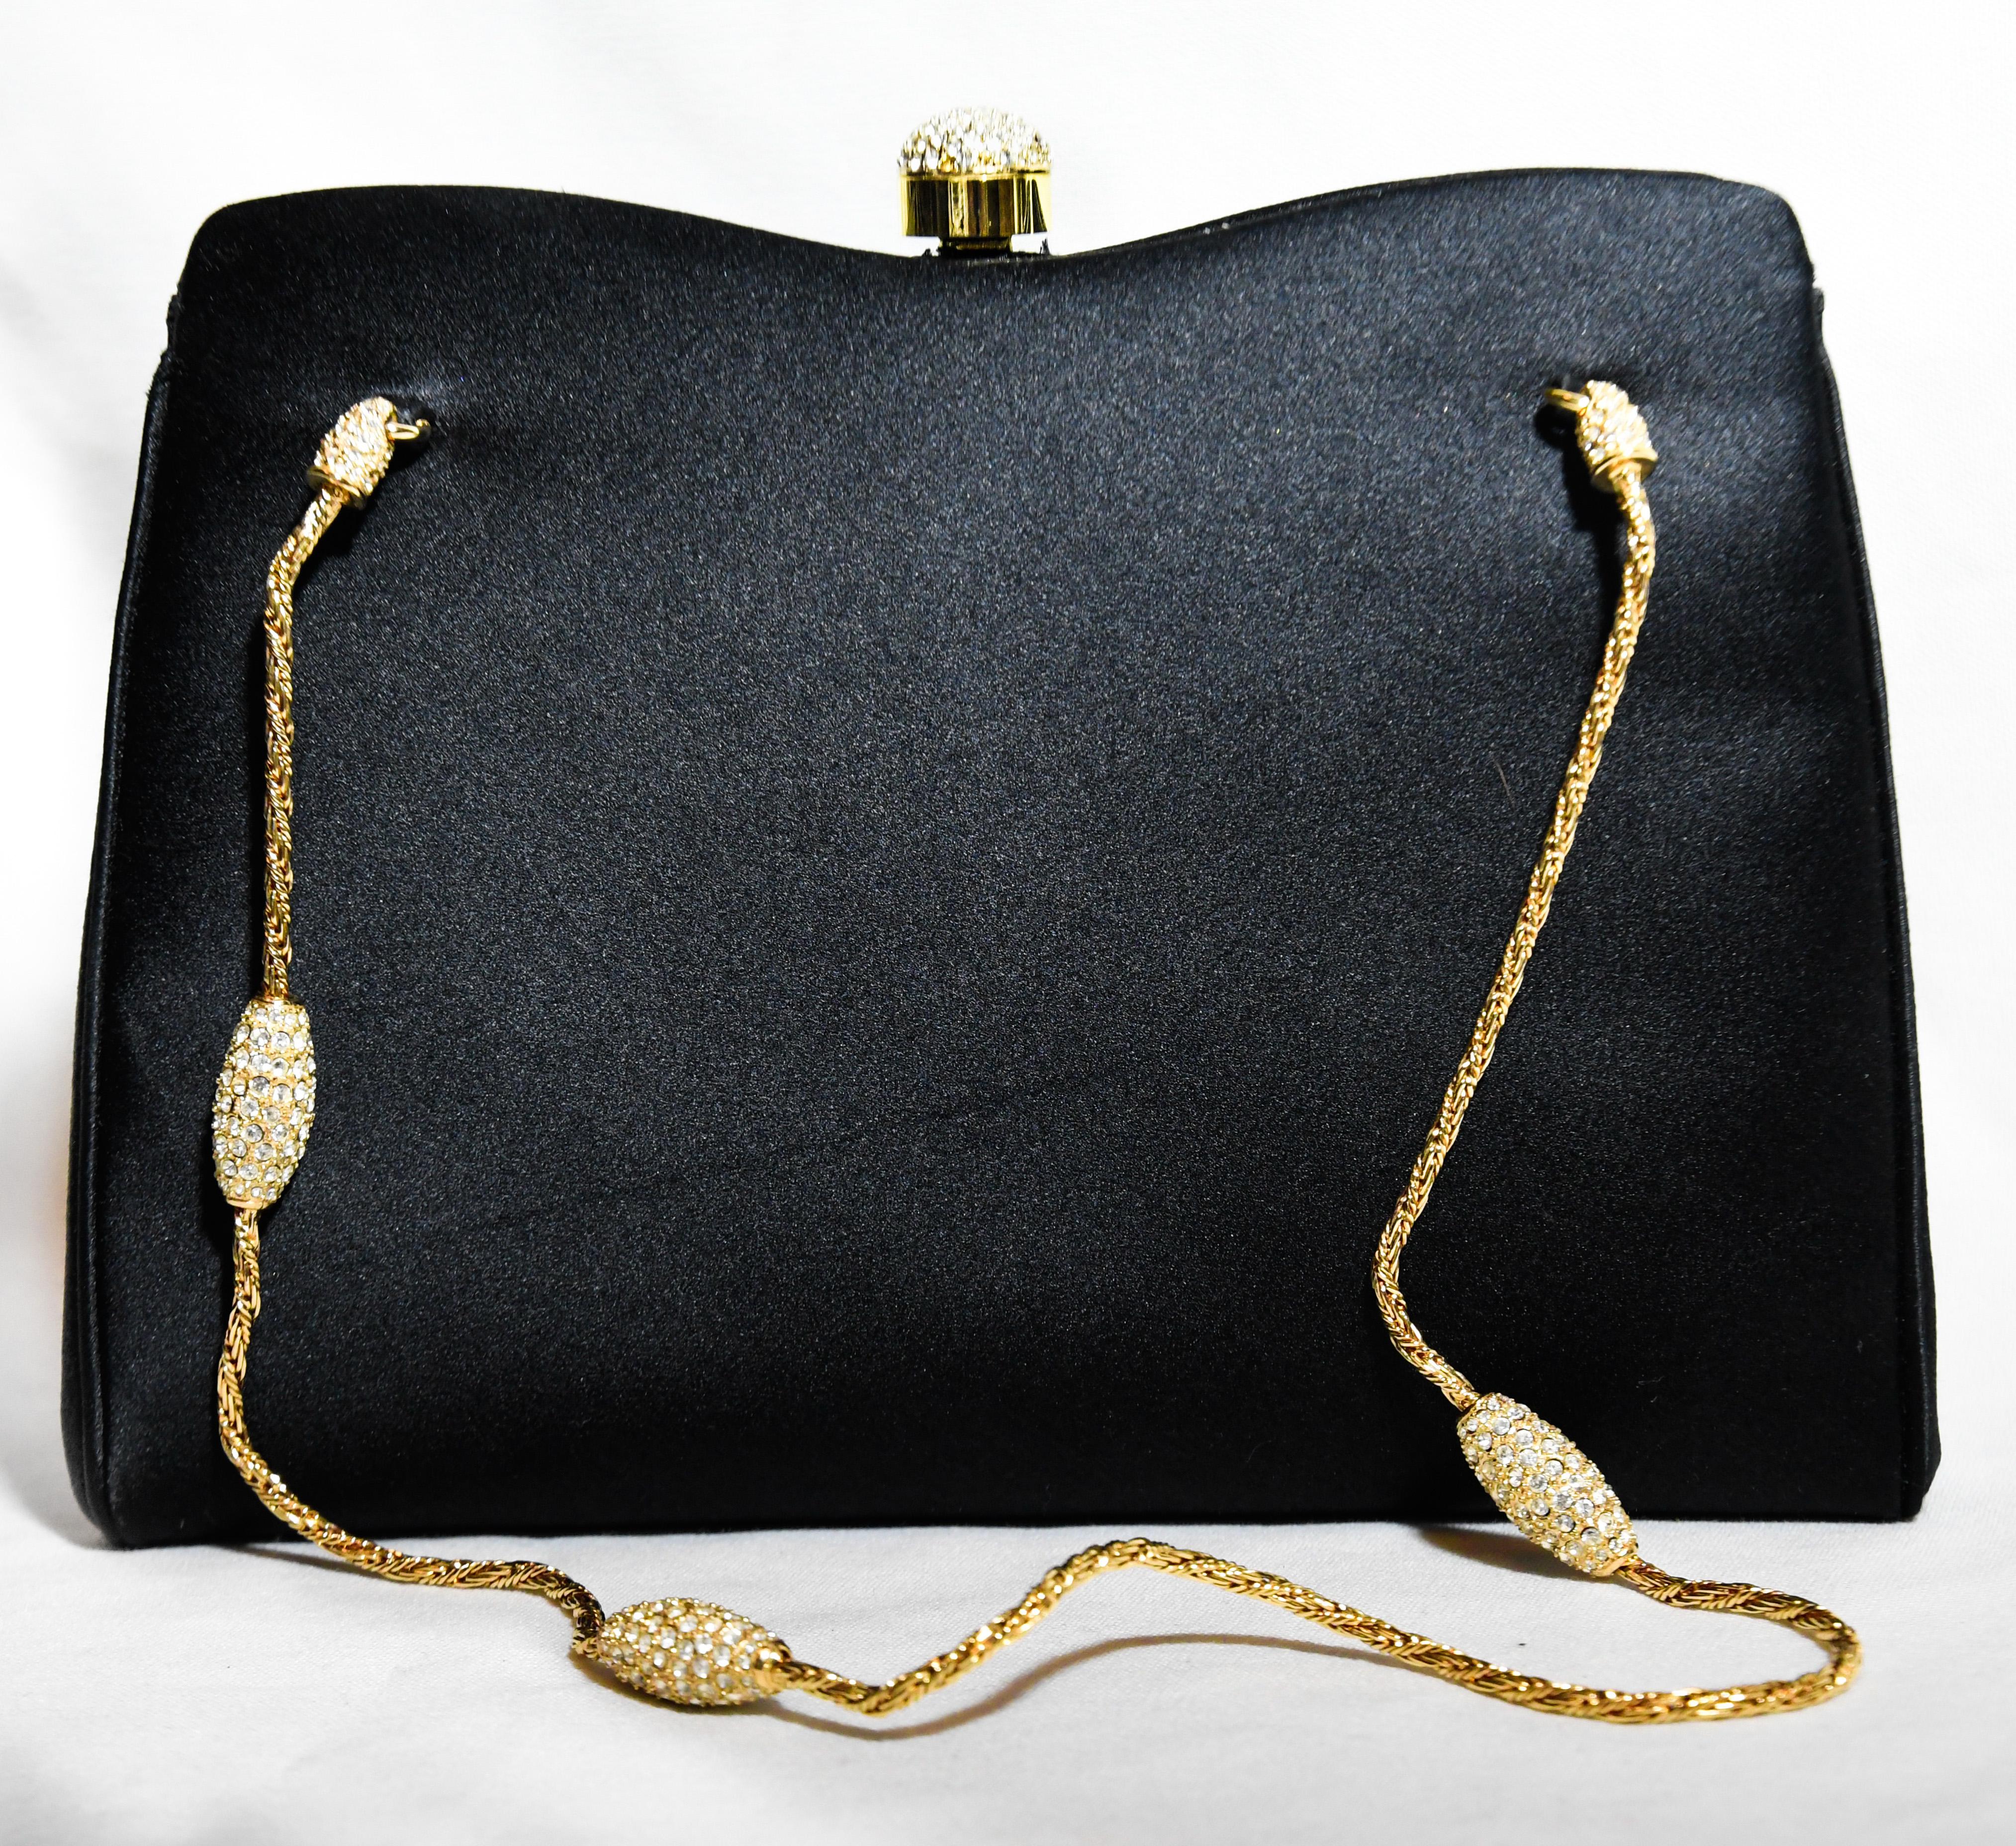 Judith Leiber Black Satin Bag With Gold Tone & Crystal Top Handle In Excellent Condition For Sale In Palm Beach, FL